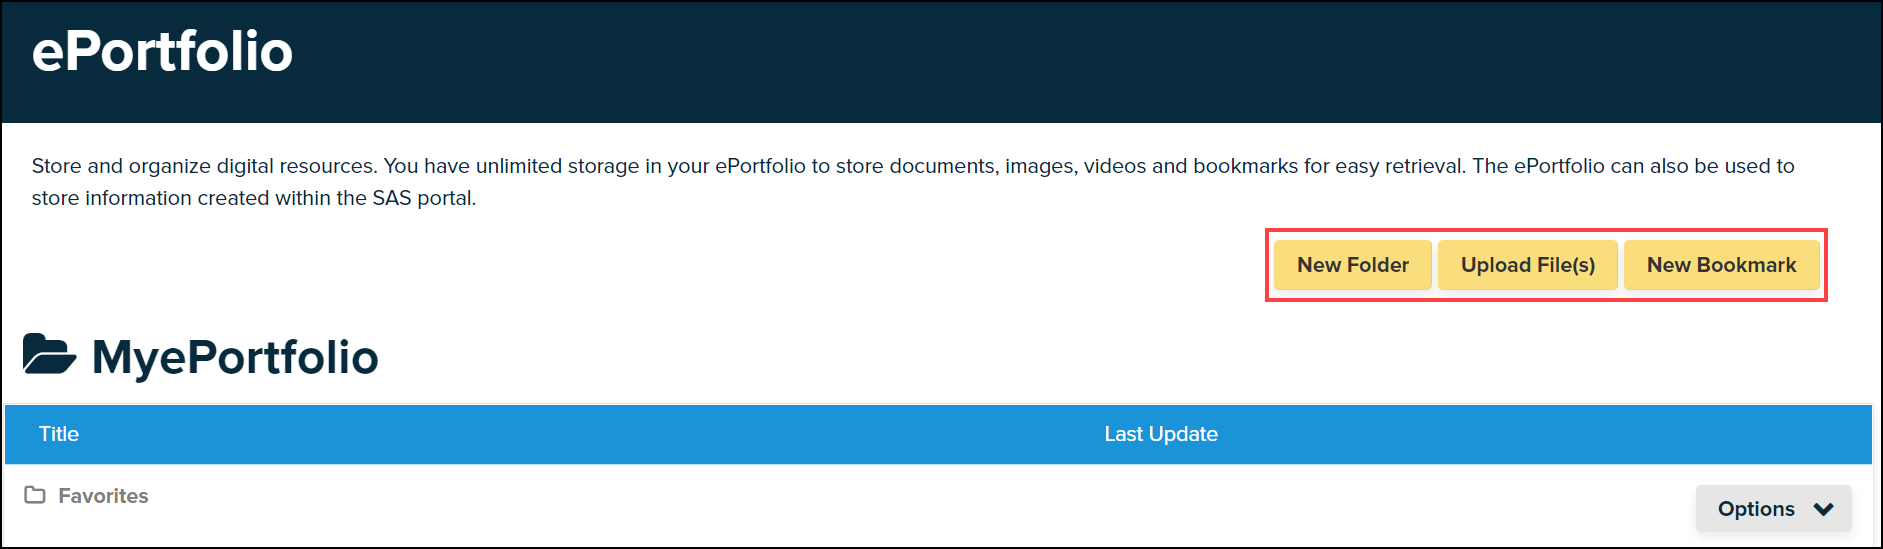 my e portfolio screen with new folder, upload files, and new bookmark buttons highlighted